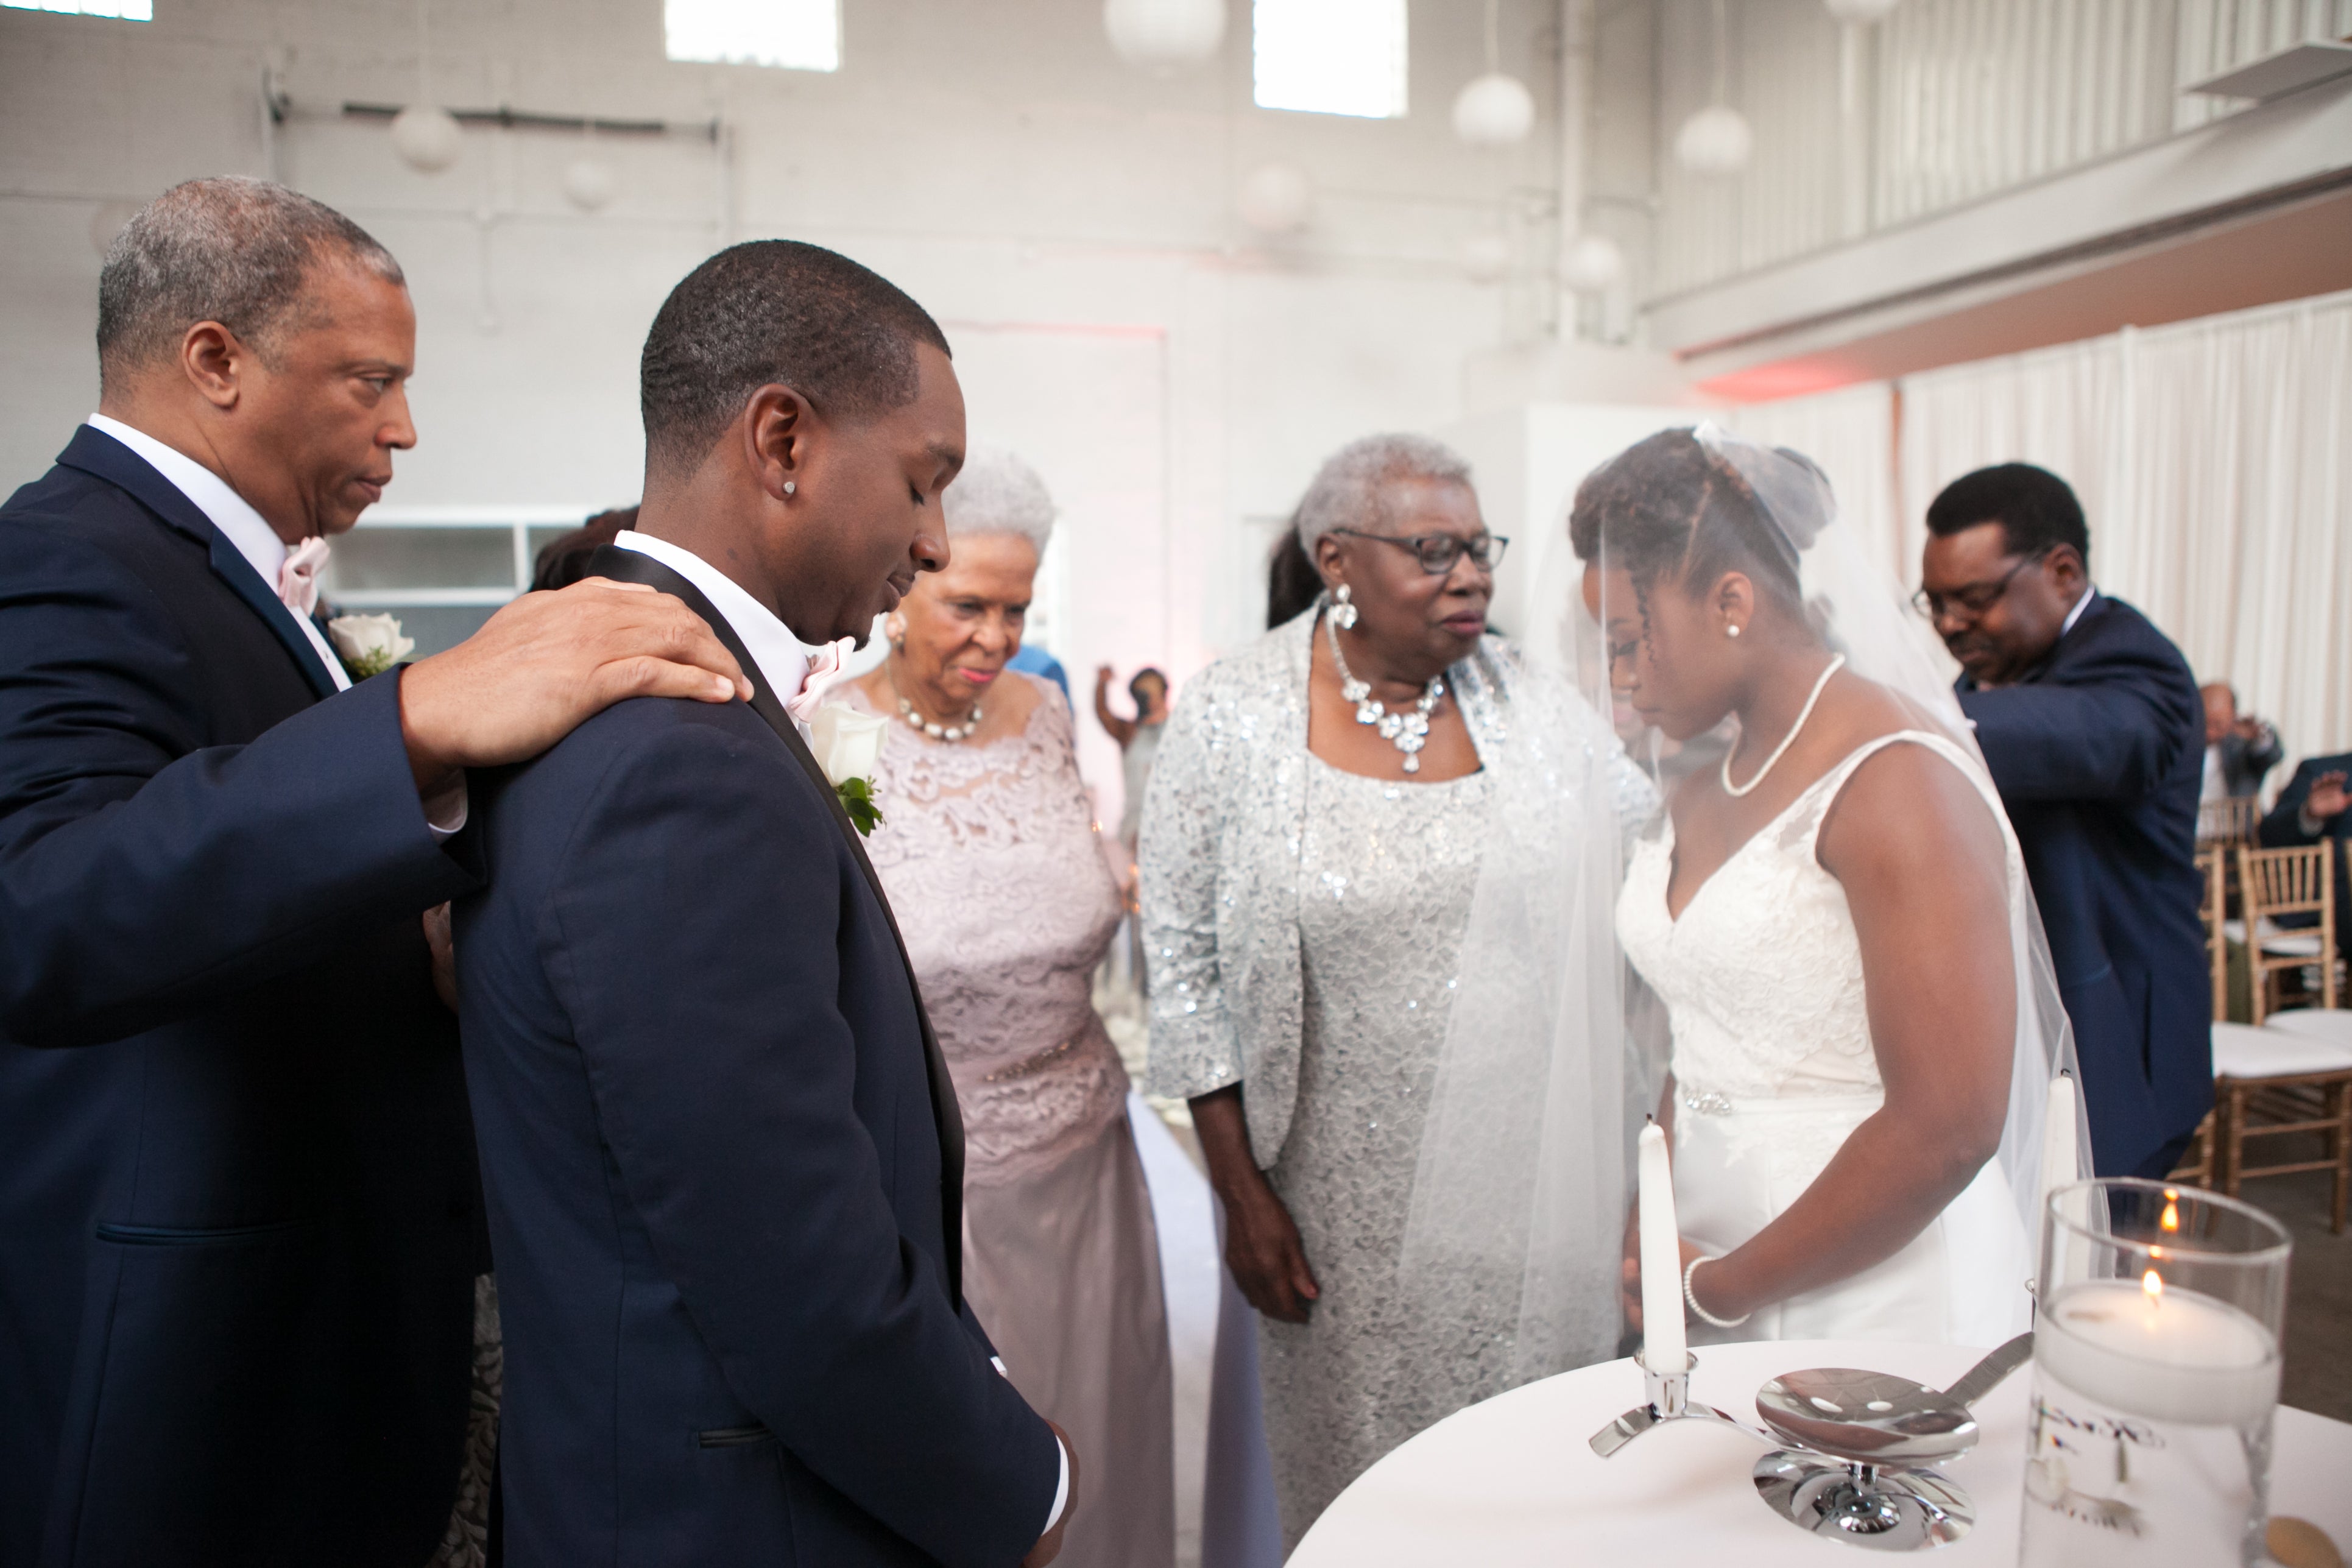 Bridal Bliss: See Why We Love Marcus and Kristin's Modern Wedding So Much
